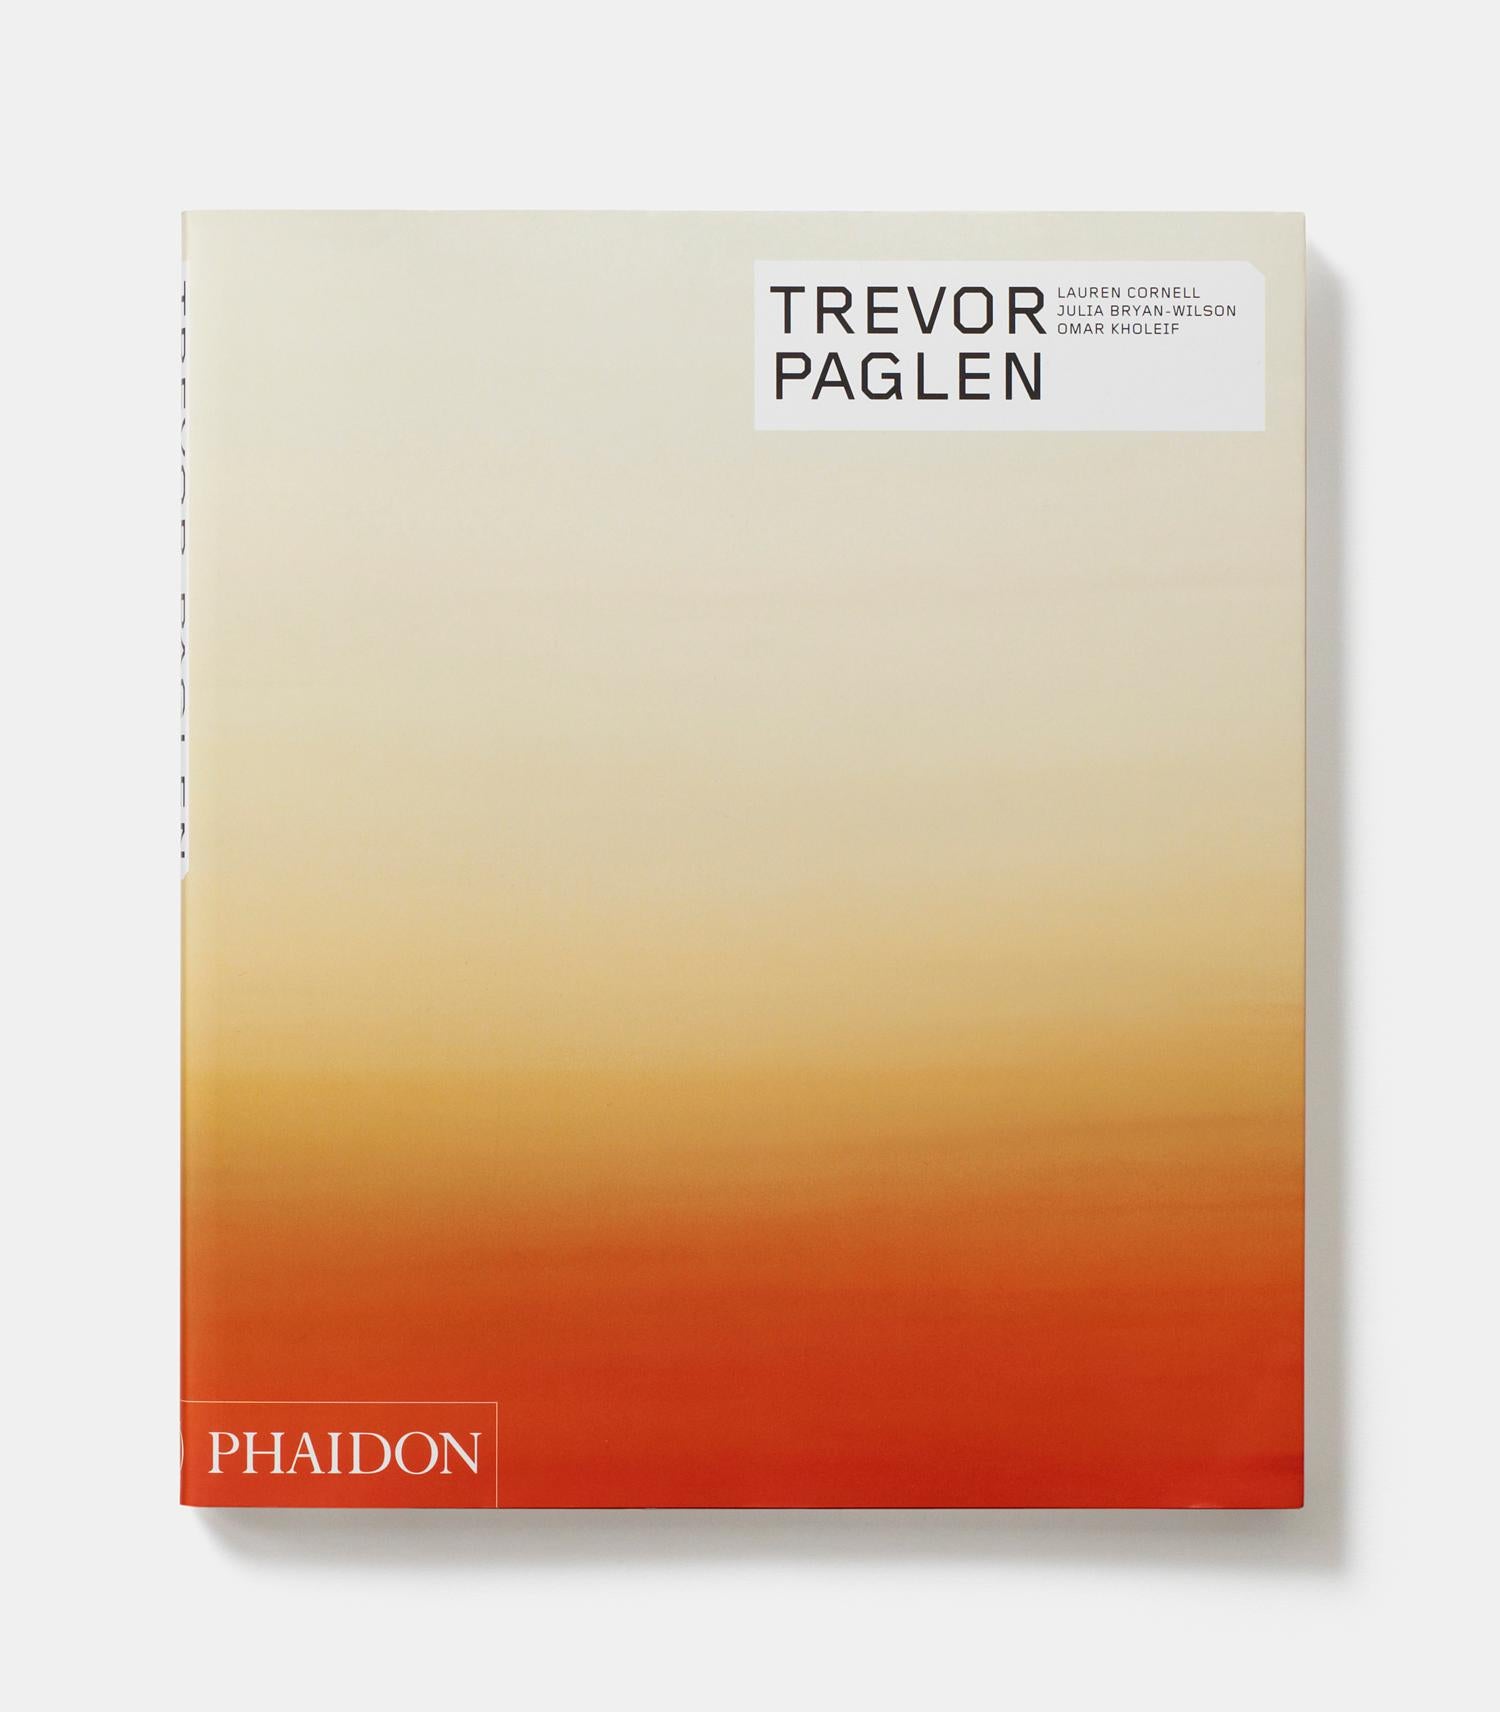 The first complete monograph on an artist whose work investigates surveillance and government secrecy in the digital age

Trevor Paglen's art gives visual geography to hidden forces, relentlessly pursuing what he calls the 'unseeable and